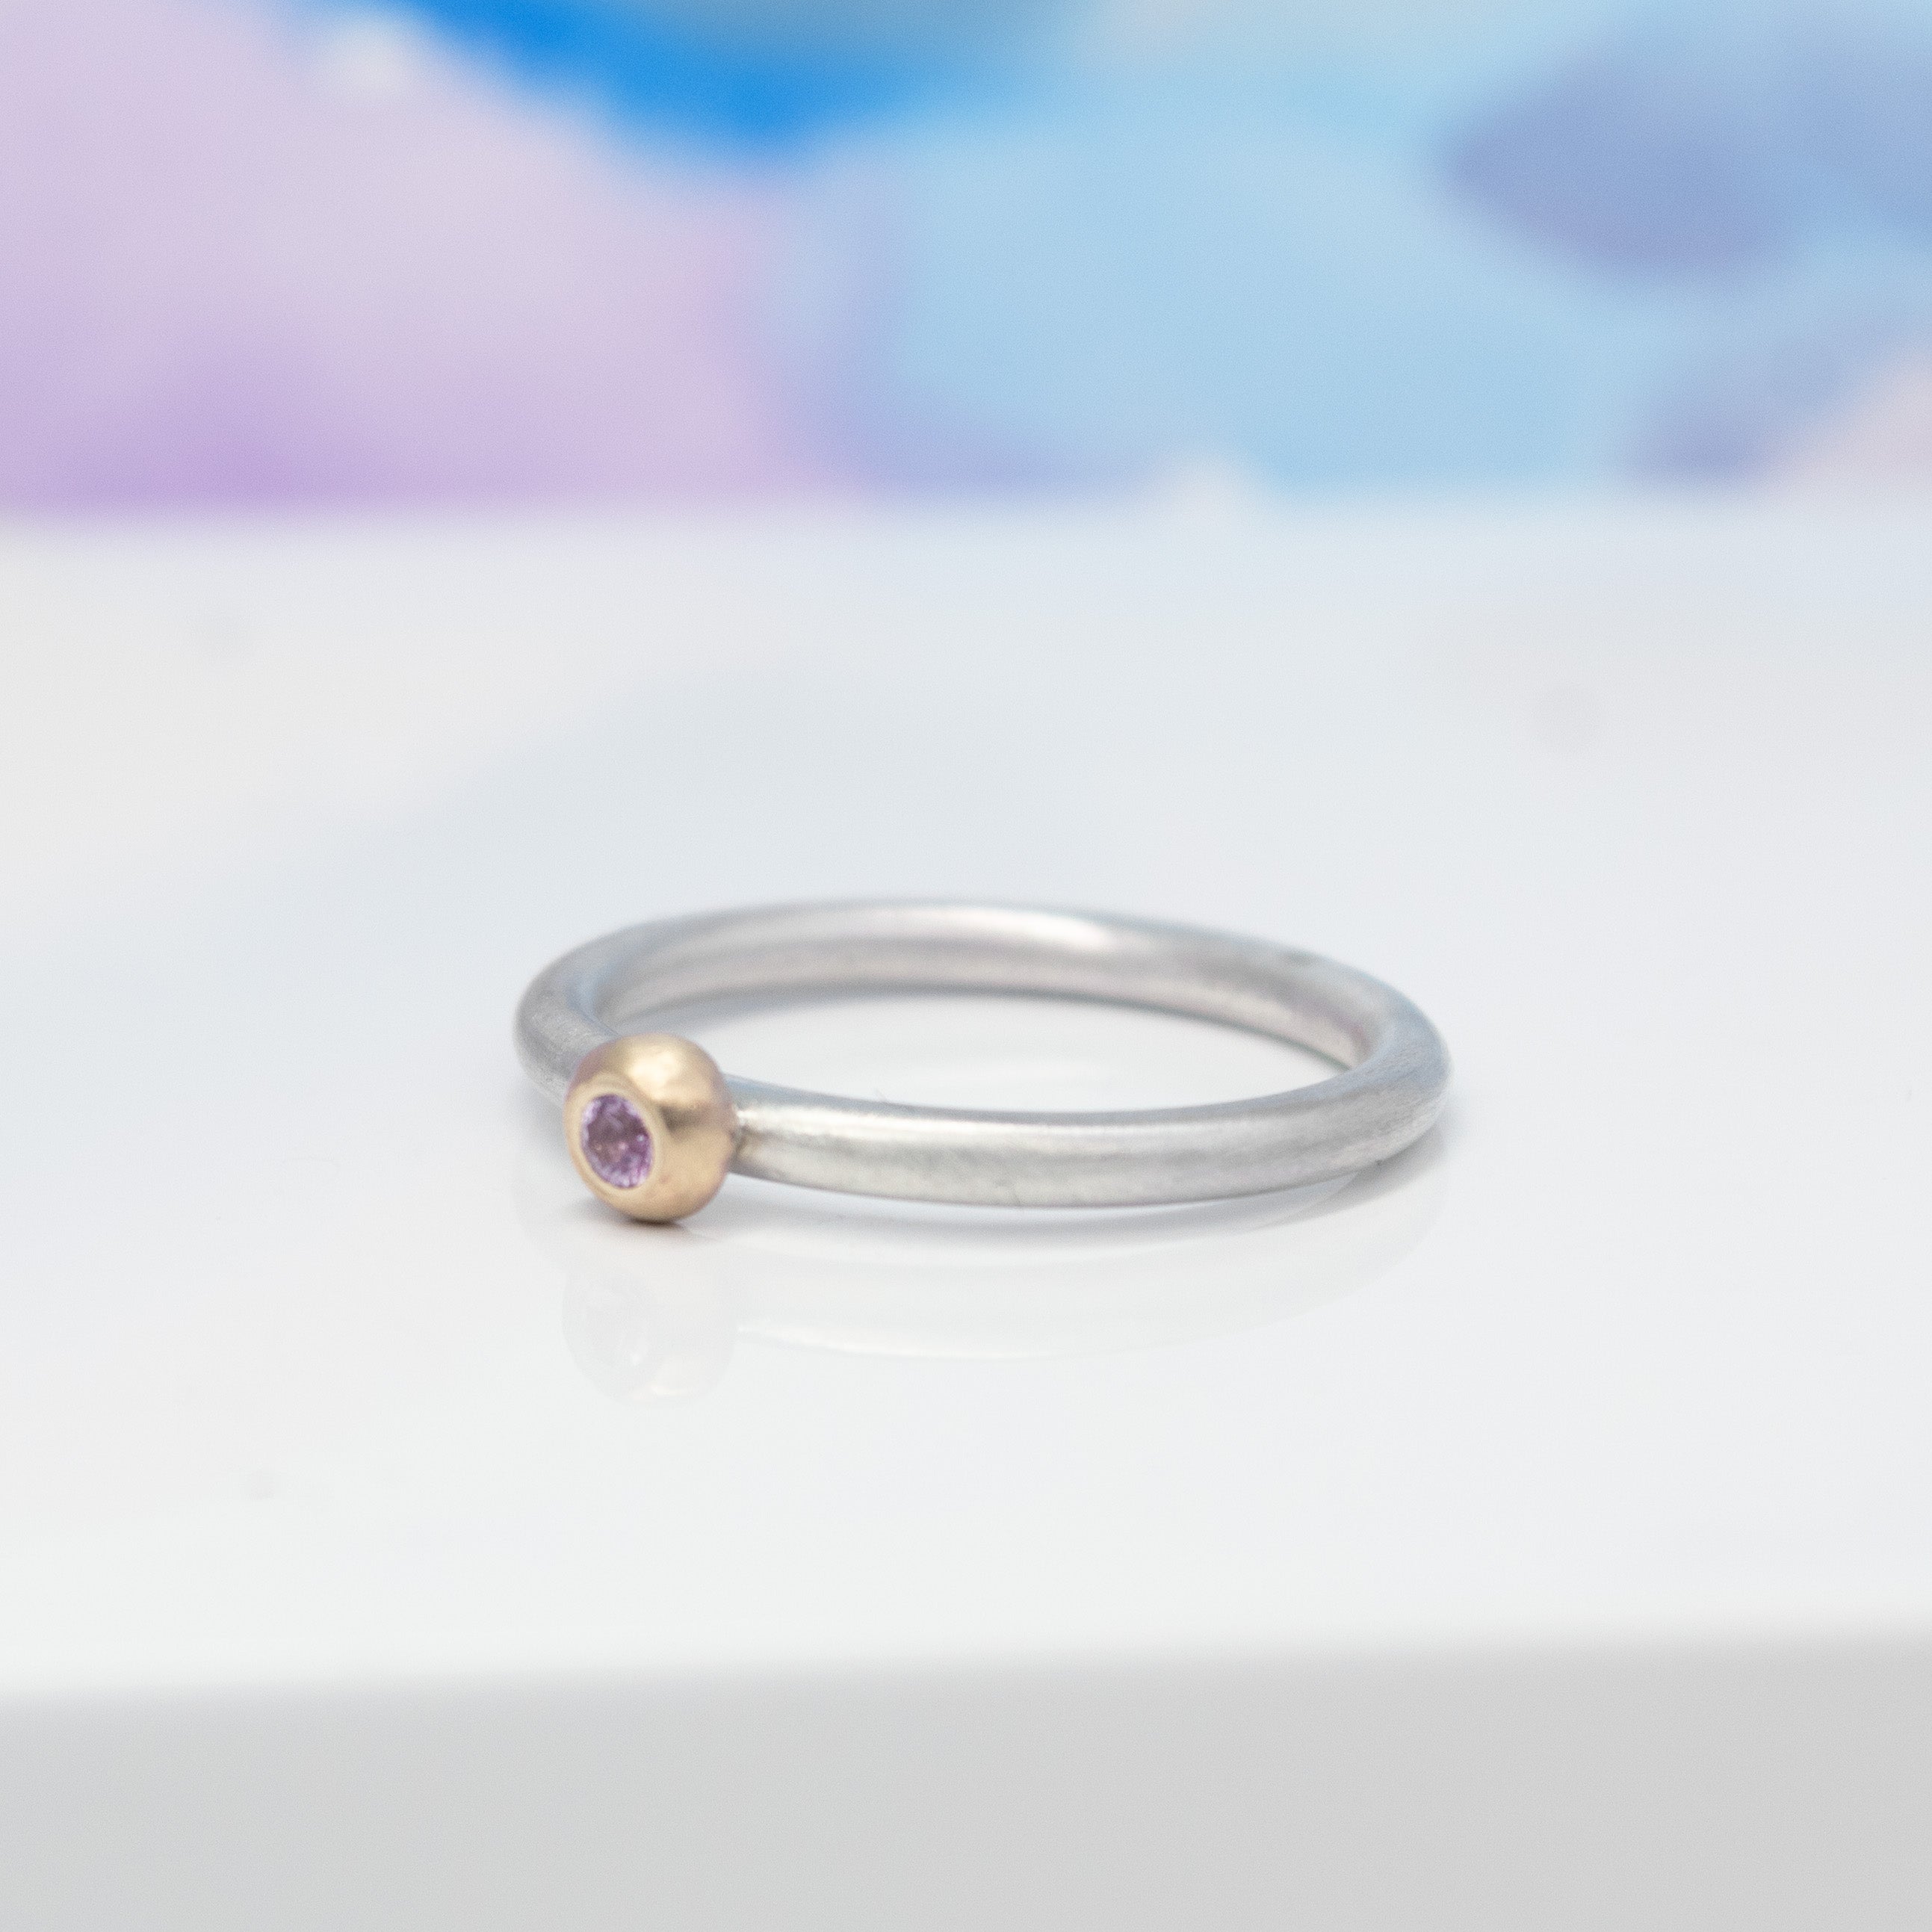 Silver Stacking Rings with 9ct Gold Dot and Gemstone